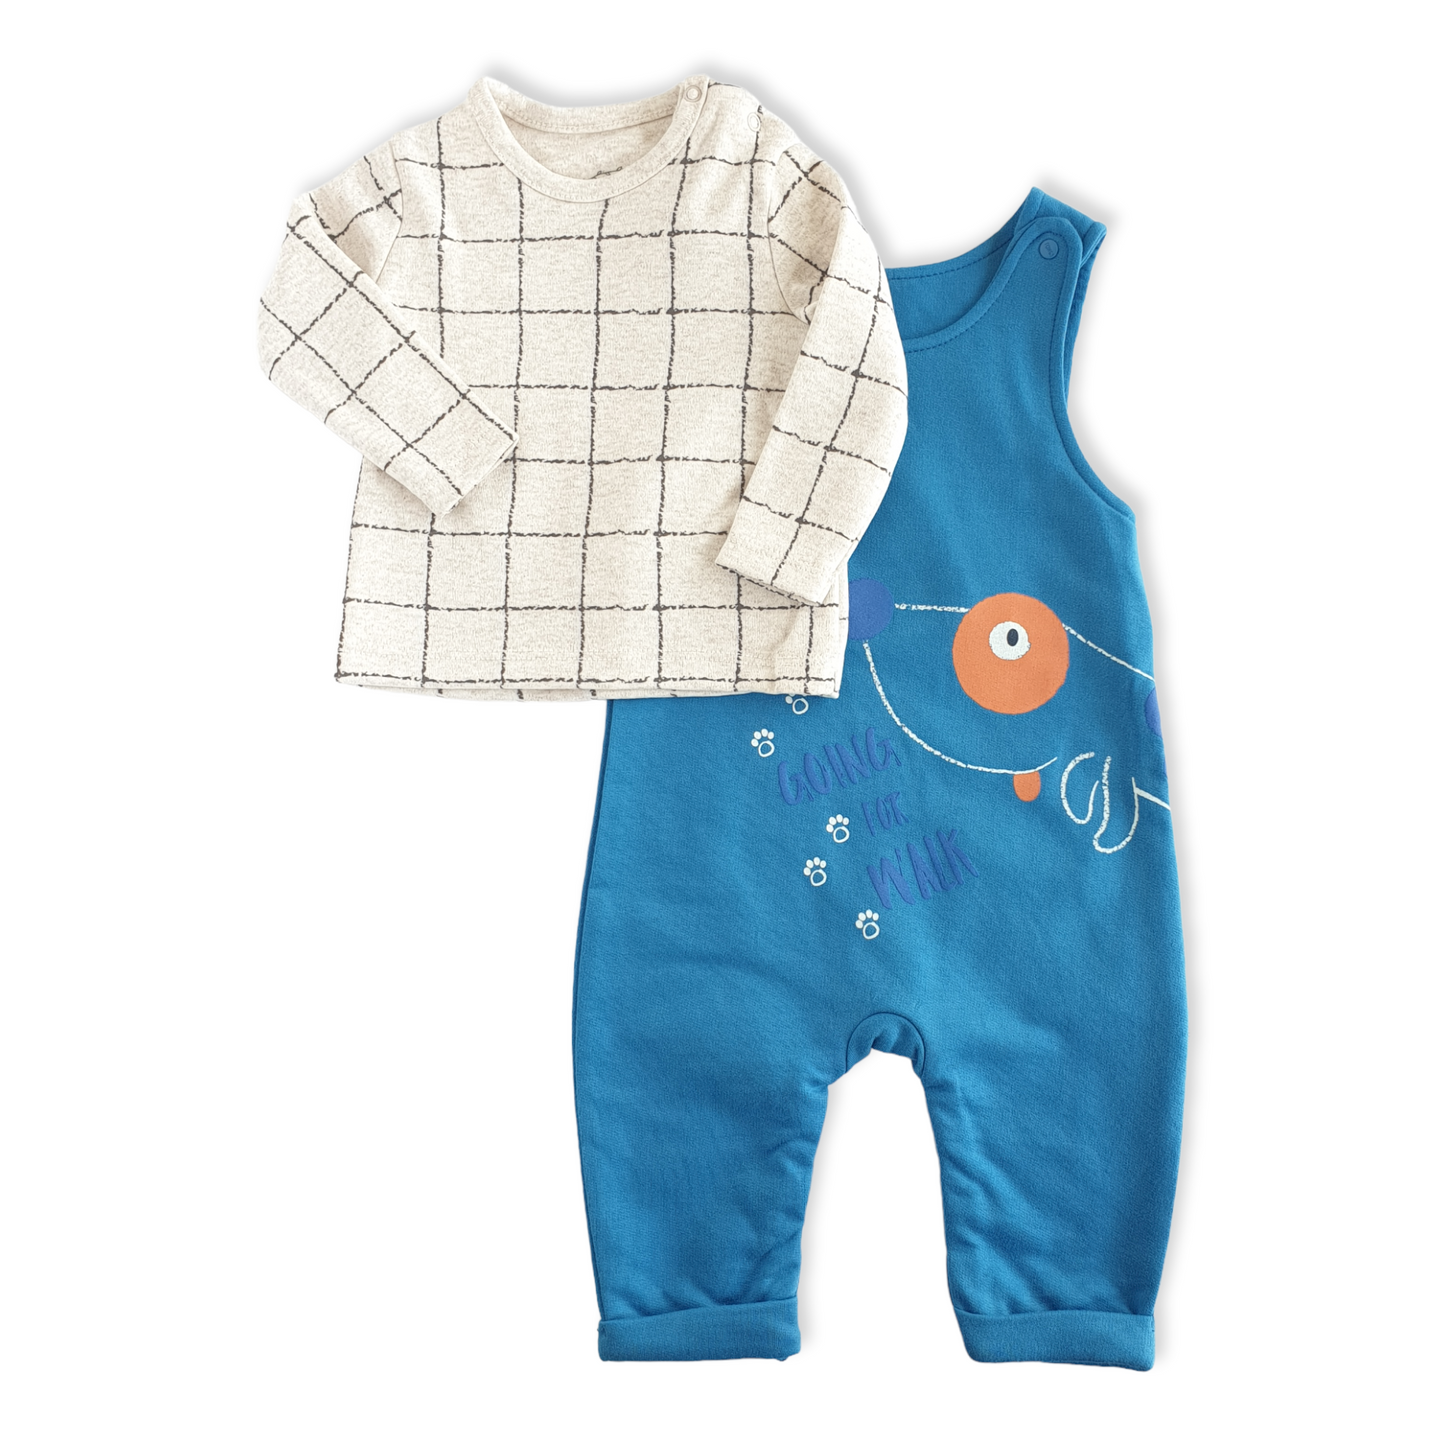 Blue Going for Walk Baby Boy Overall Set